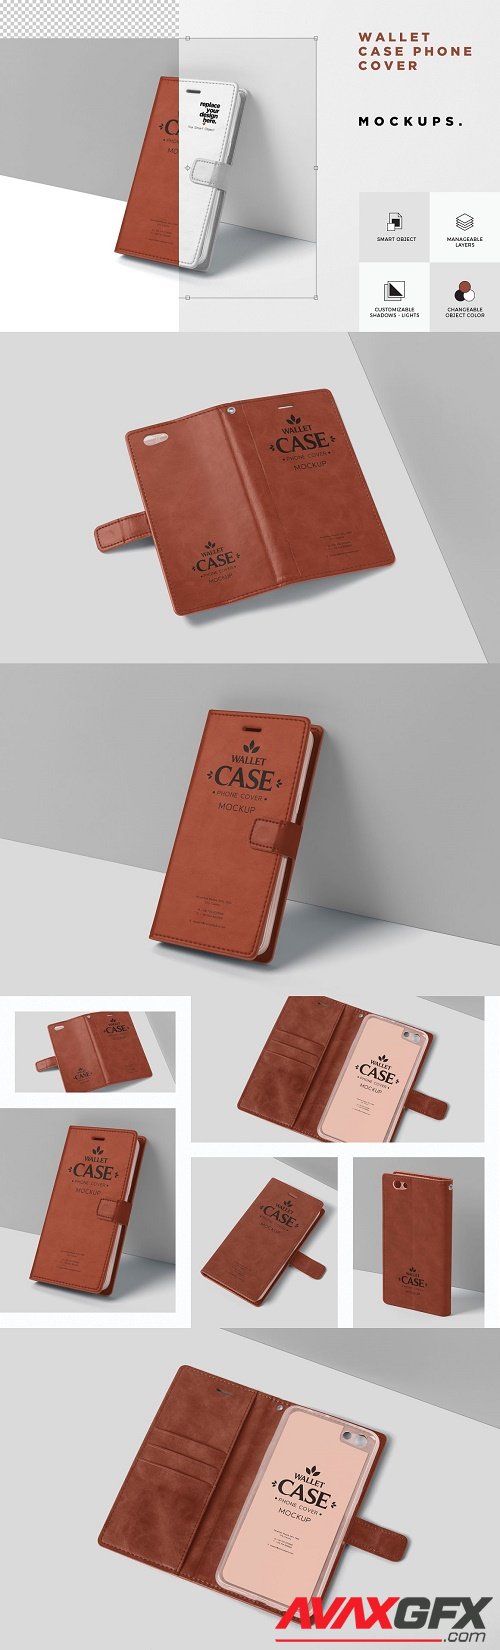 Wallet Case Phone Cover Mockup - 6072990